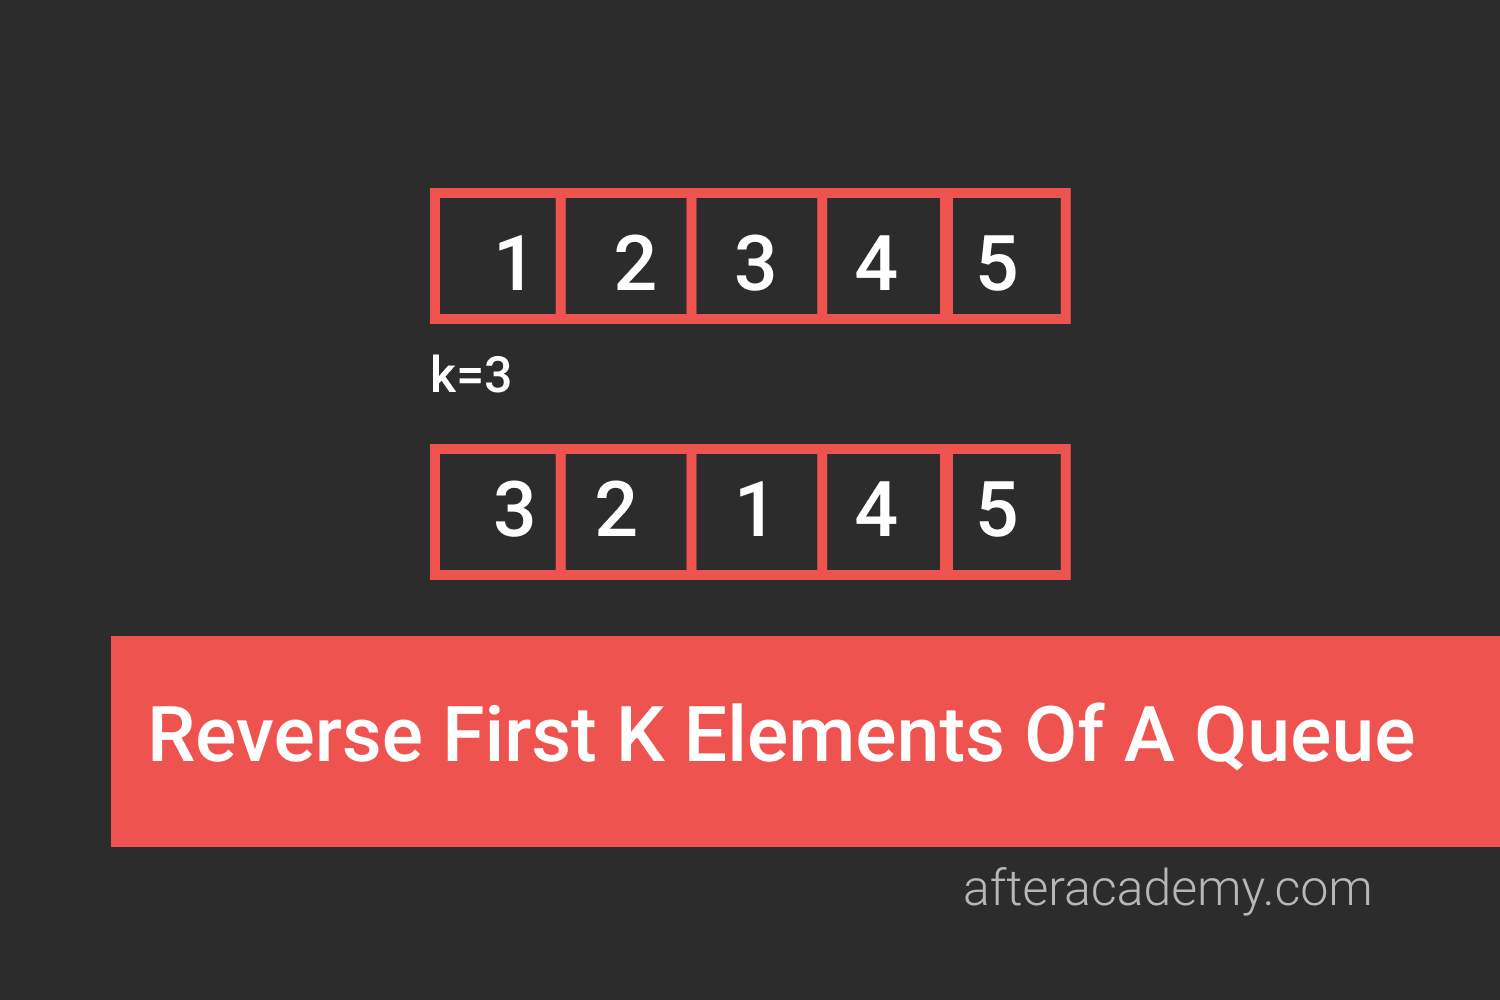 Reverse First K Elements Of A Queue